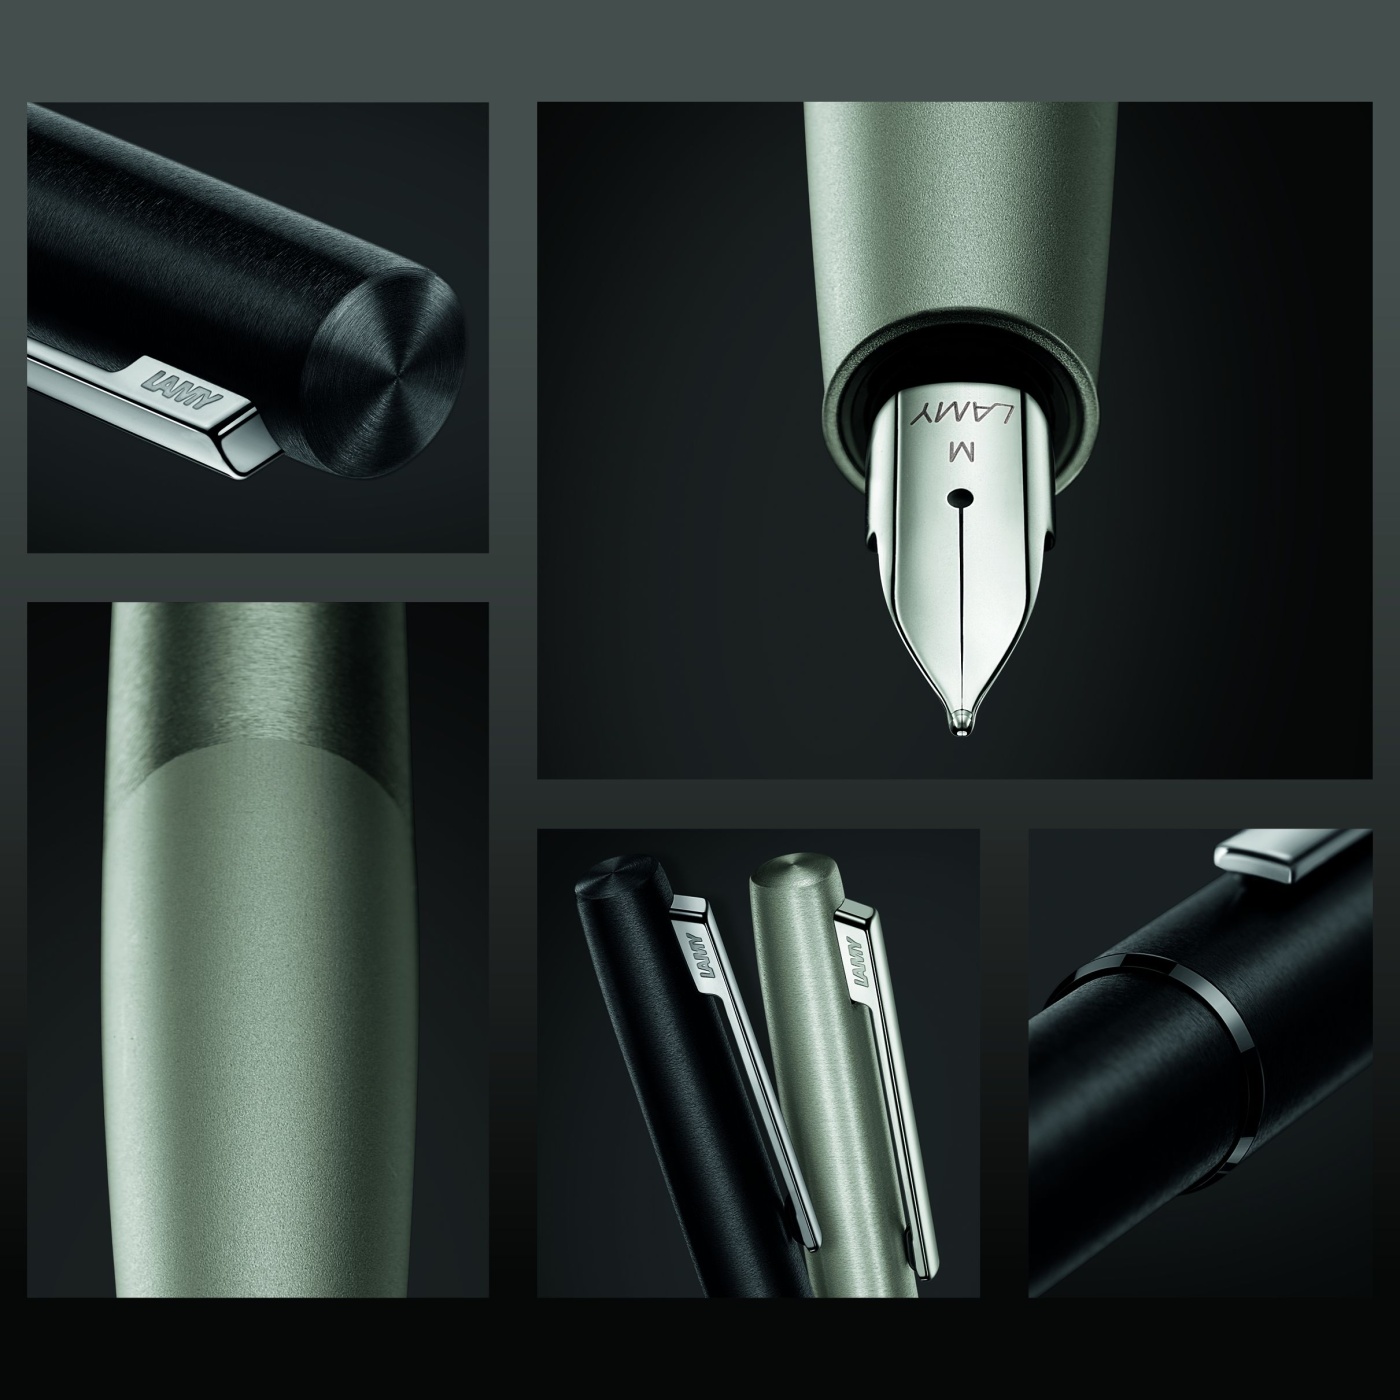 Aion Fountain pen Olivesilver in the group Pens / Fine Writing / Gift Pens at Pen Store (102010_r)